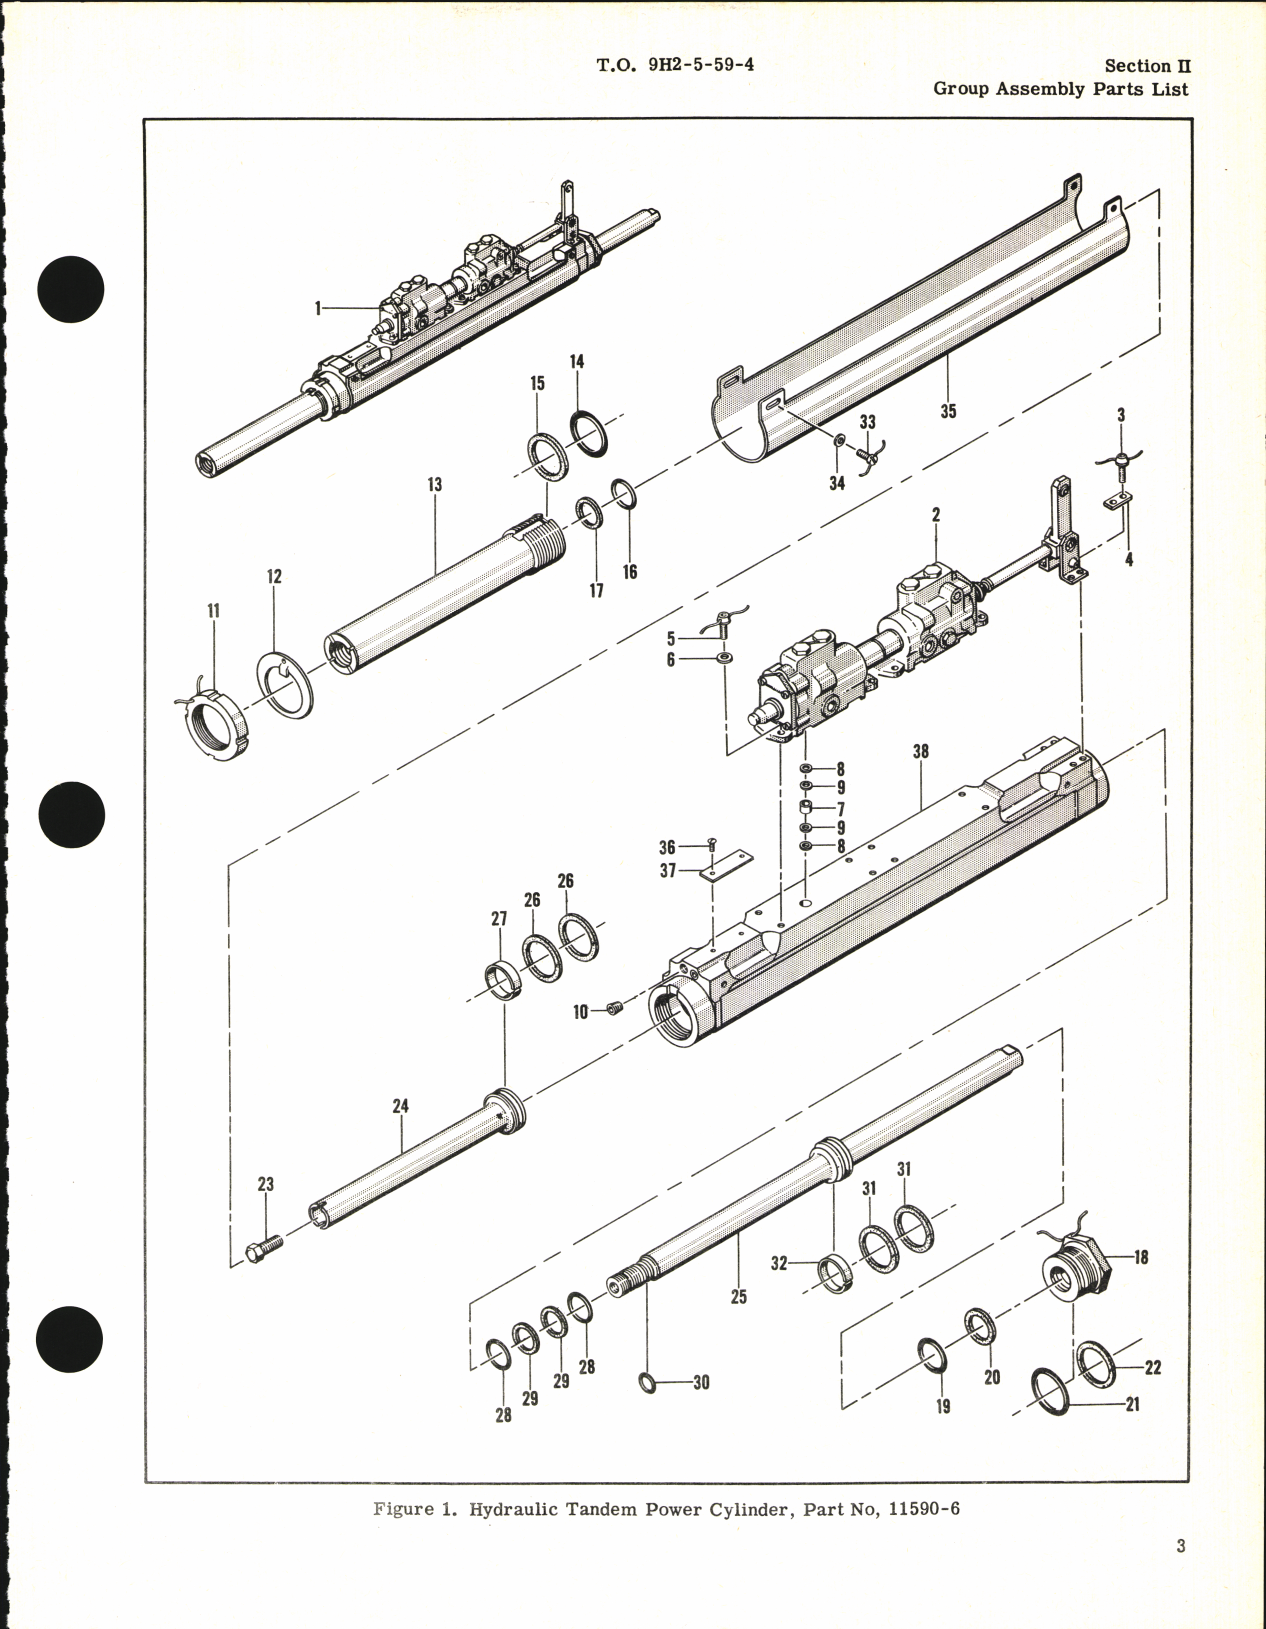 Sample page 5 from AirCorps Library document: Illustrated Parts Breakdown for Hydraulic Tandem Power Cylinder Part No. 11590-6